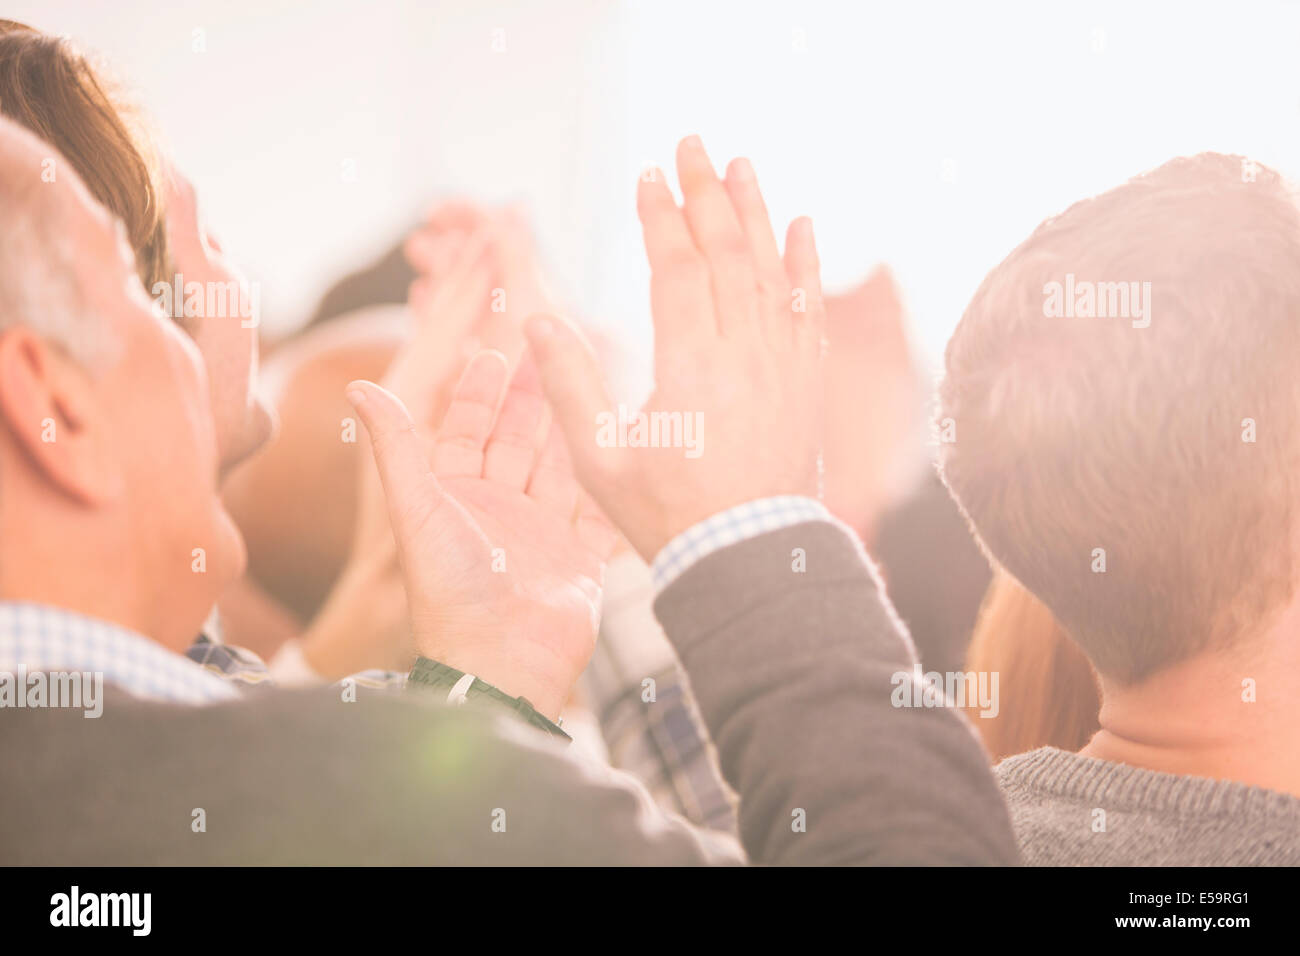 Crowd clapping Stock Photo